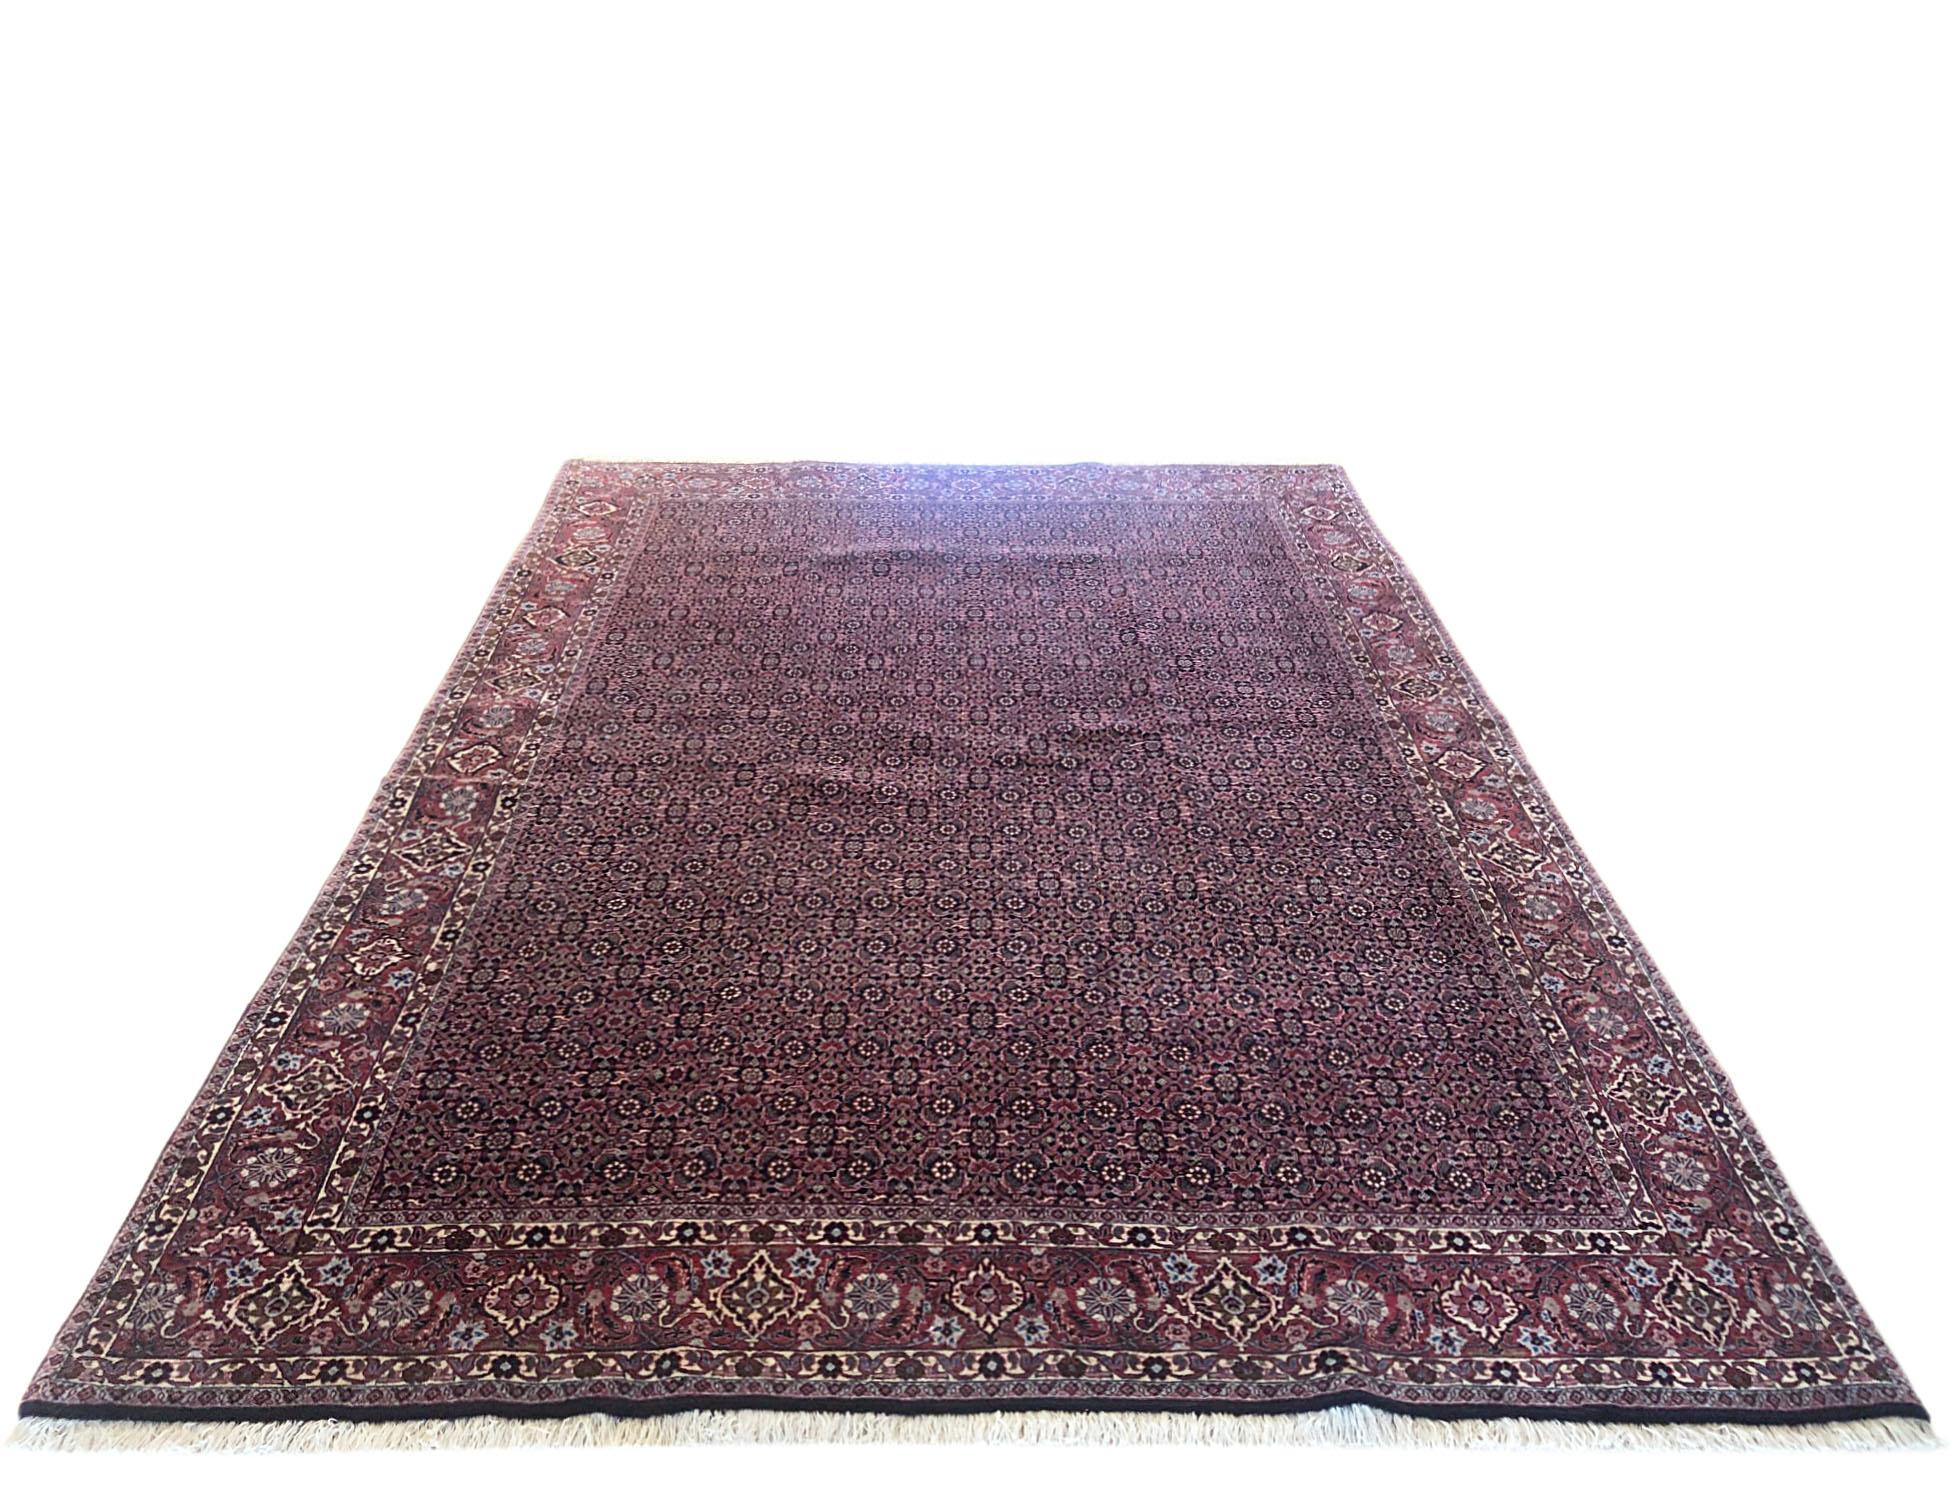 This piece is a handmade Persian rug. The pile is wool with cotton foundation, the pile is incredible dense and strong. This stunning Persian Bijar rug is among the most hardwearing rug. It is made using high-quality wool, and the knots are beaten